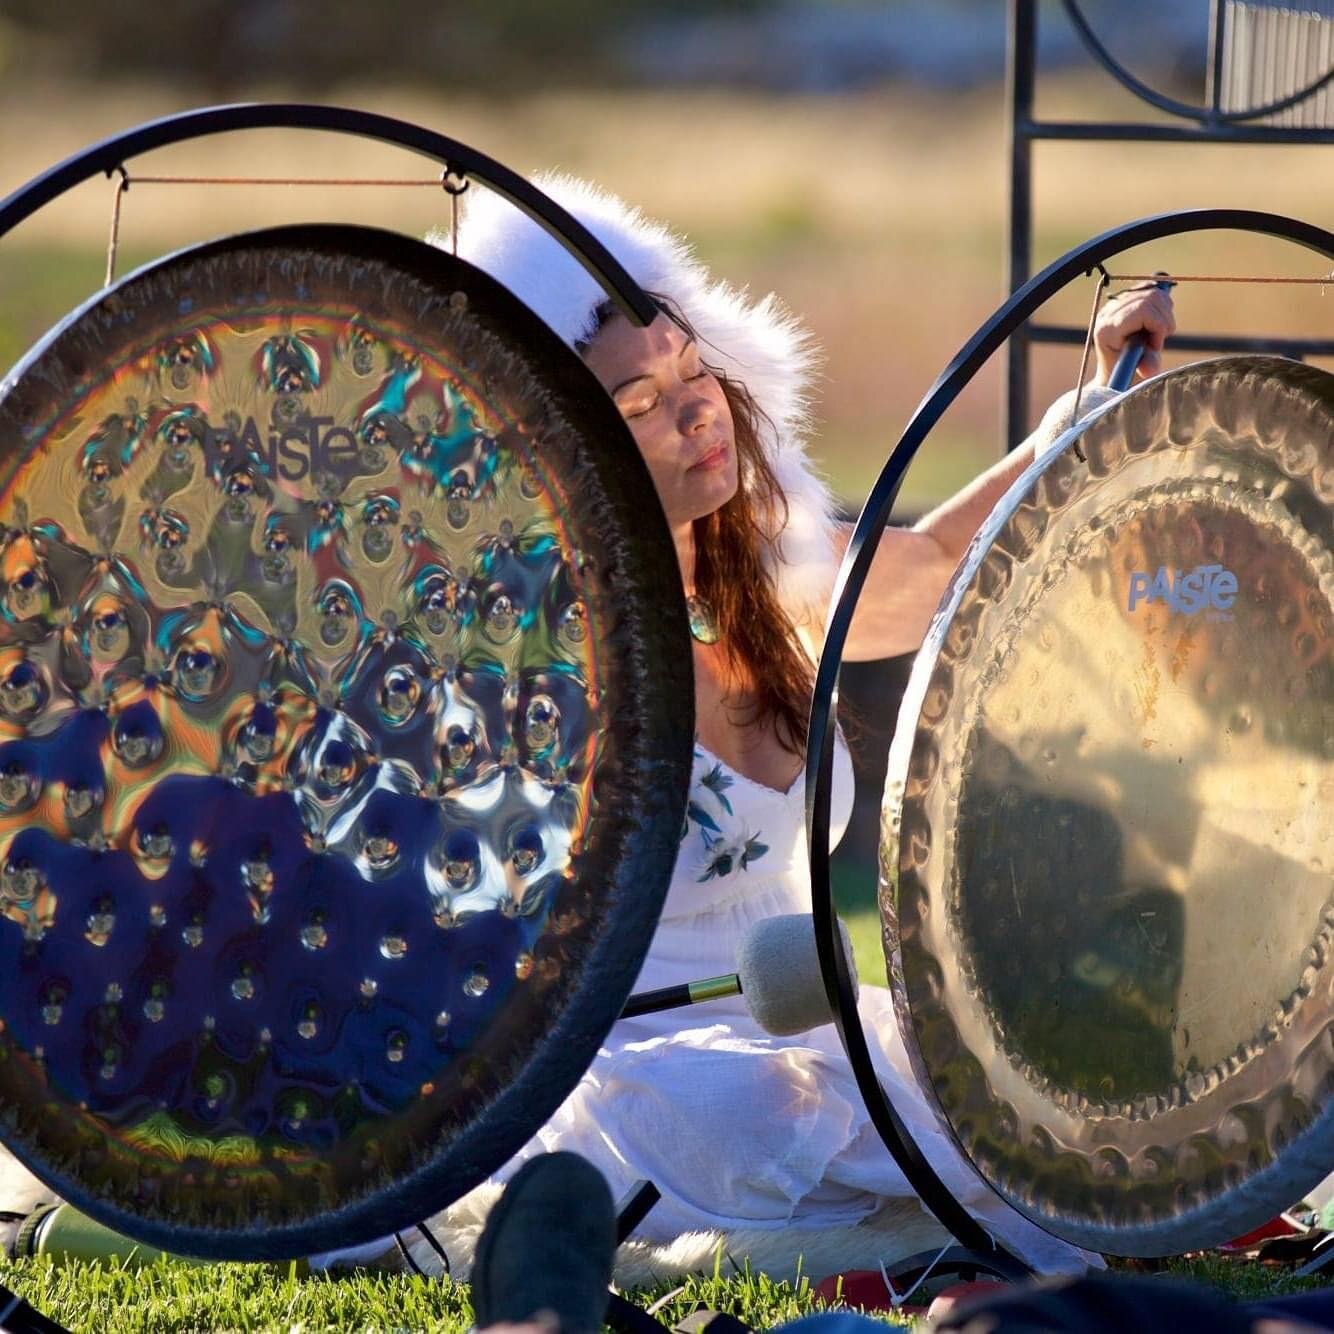 Join Blue Muse &amp; The Celestial Voice Sound Healing for a mystical deep dive into the meditative vibrations of Sacred Sound! ☮️ 🎼😌

The different frequencies emirates during the sound bath will help to quiet the mind, decrease stress and anxiety